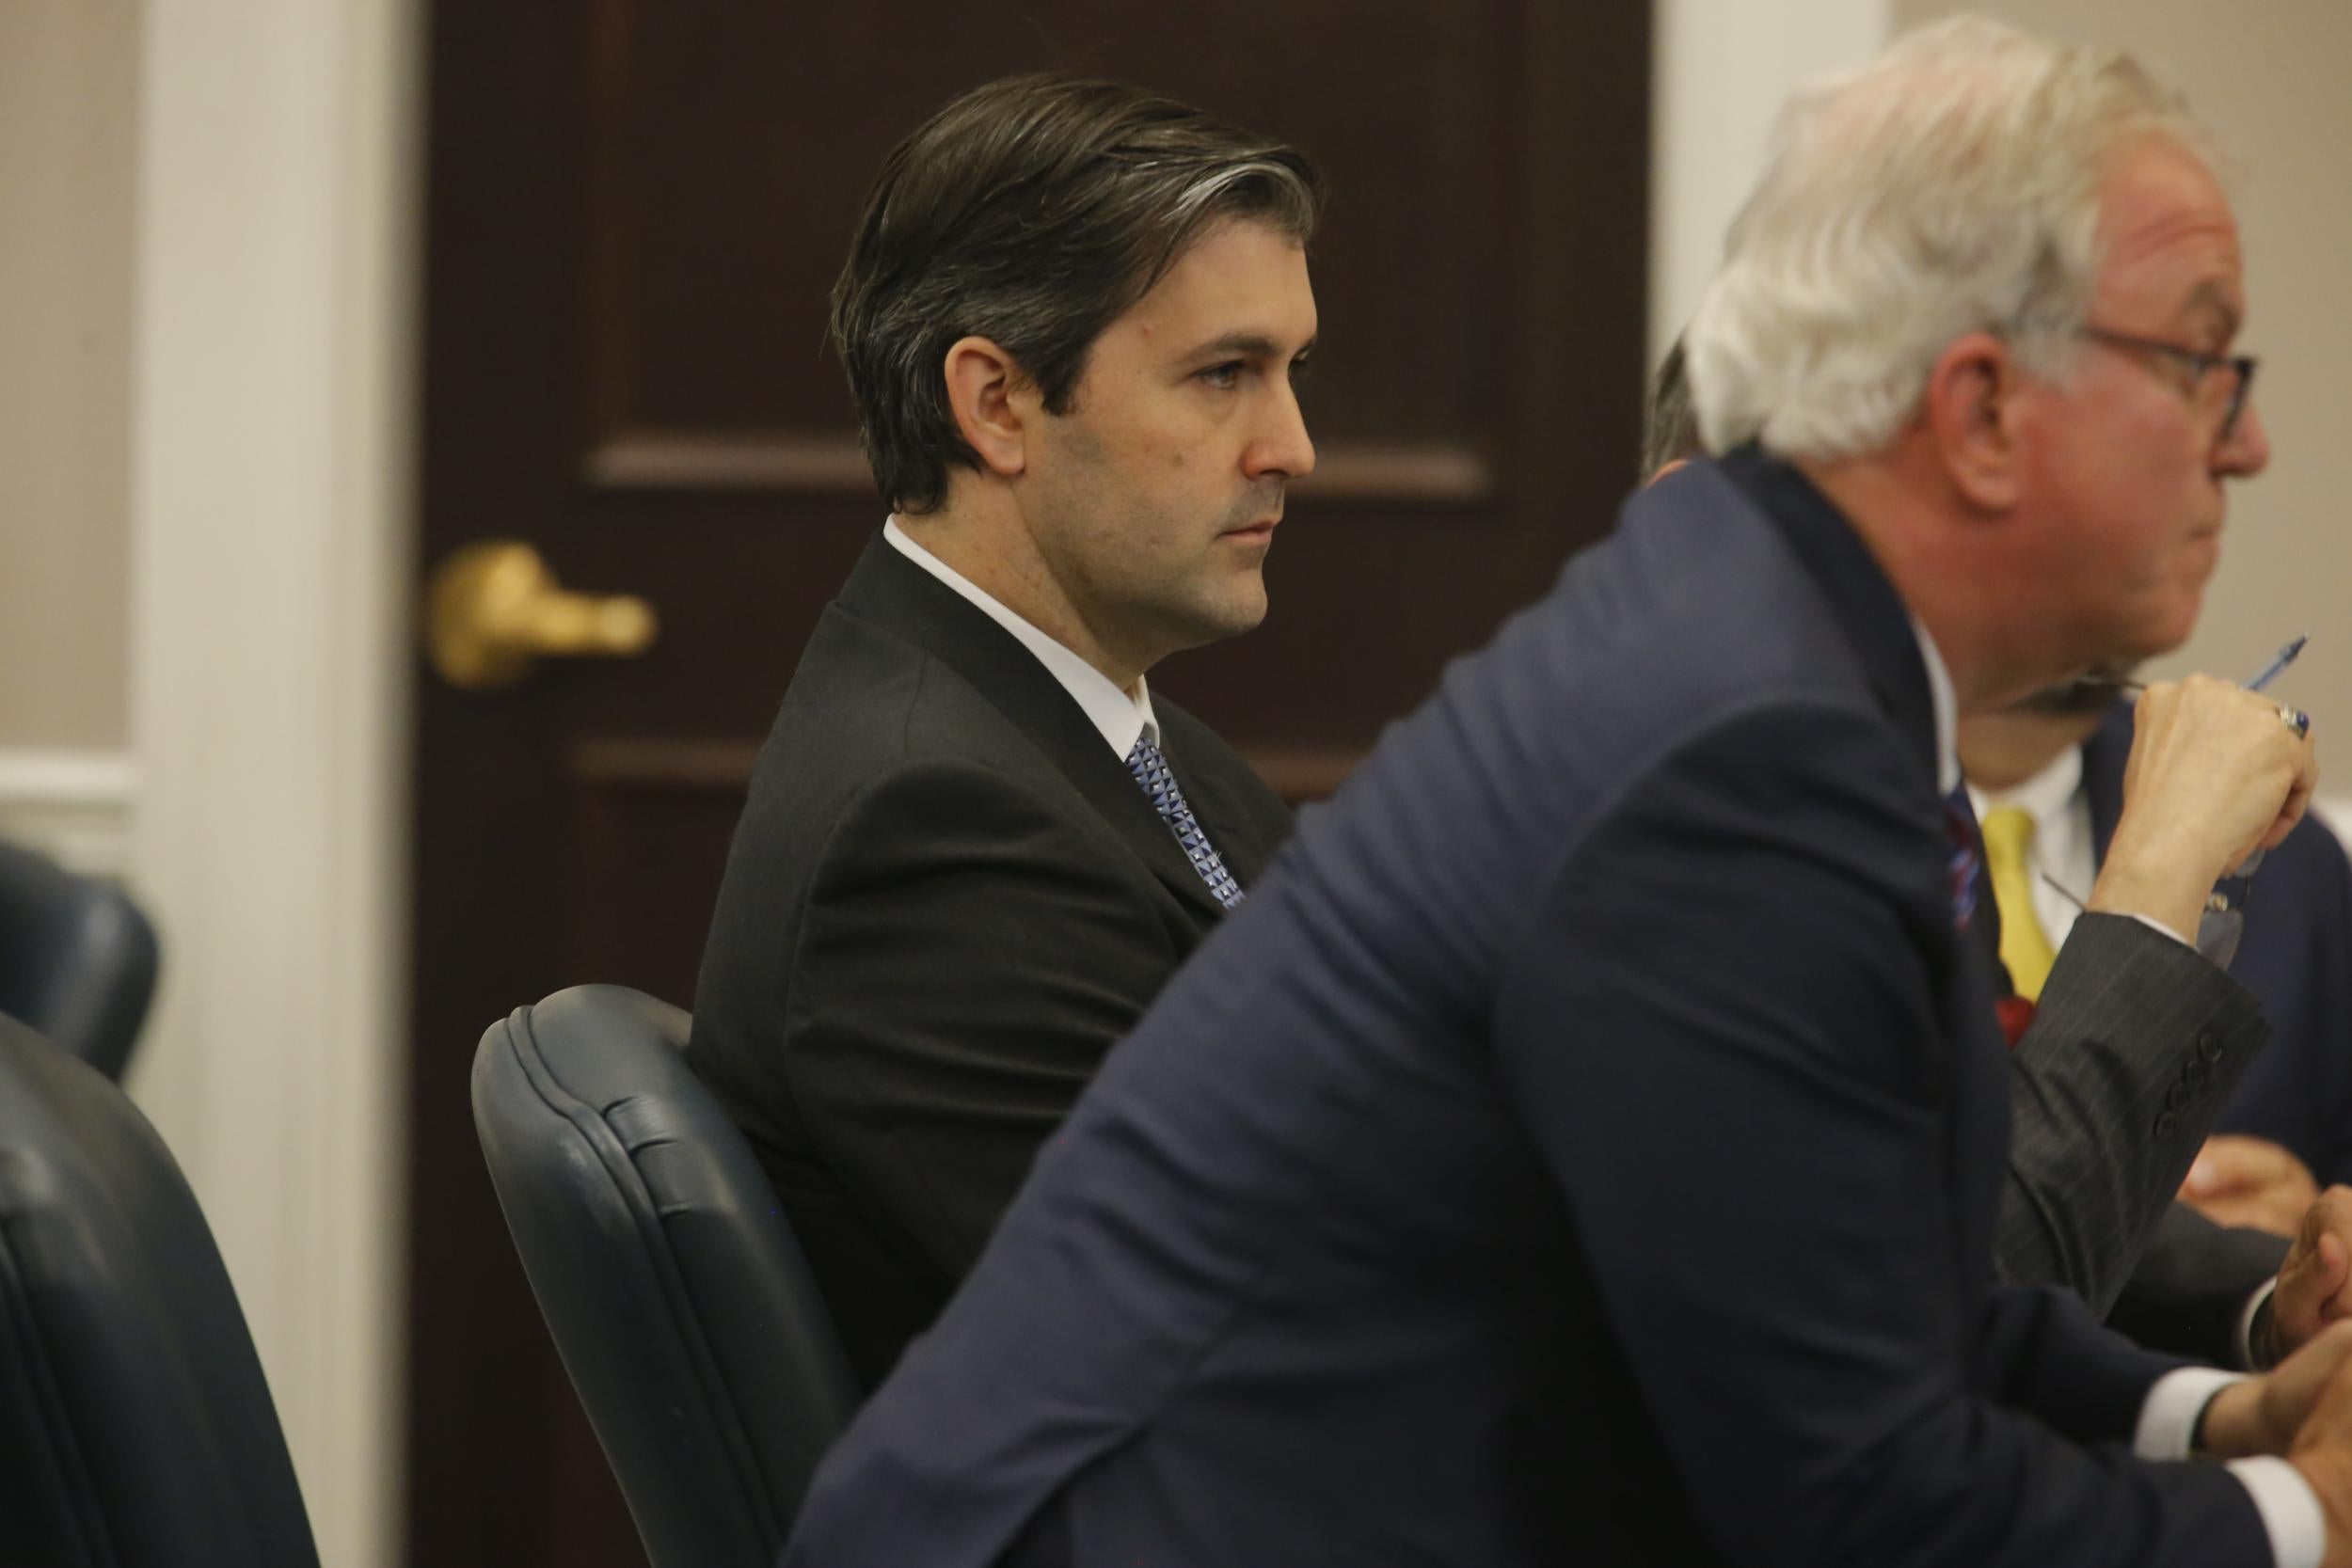 Slager pleaded guilty in a civil rights case for killing Scott